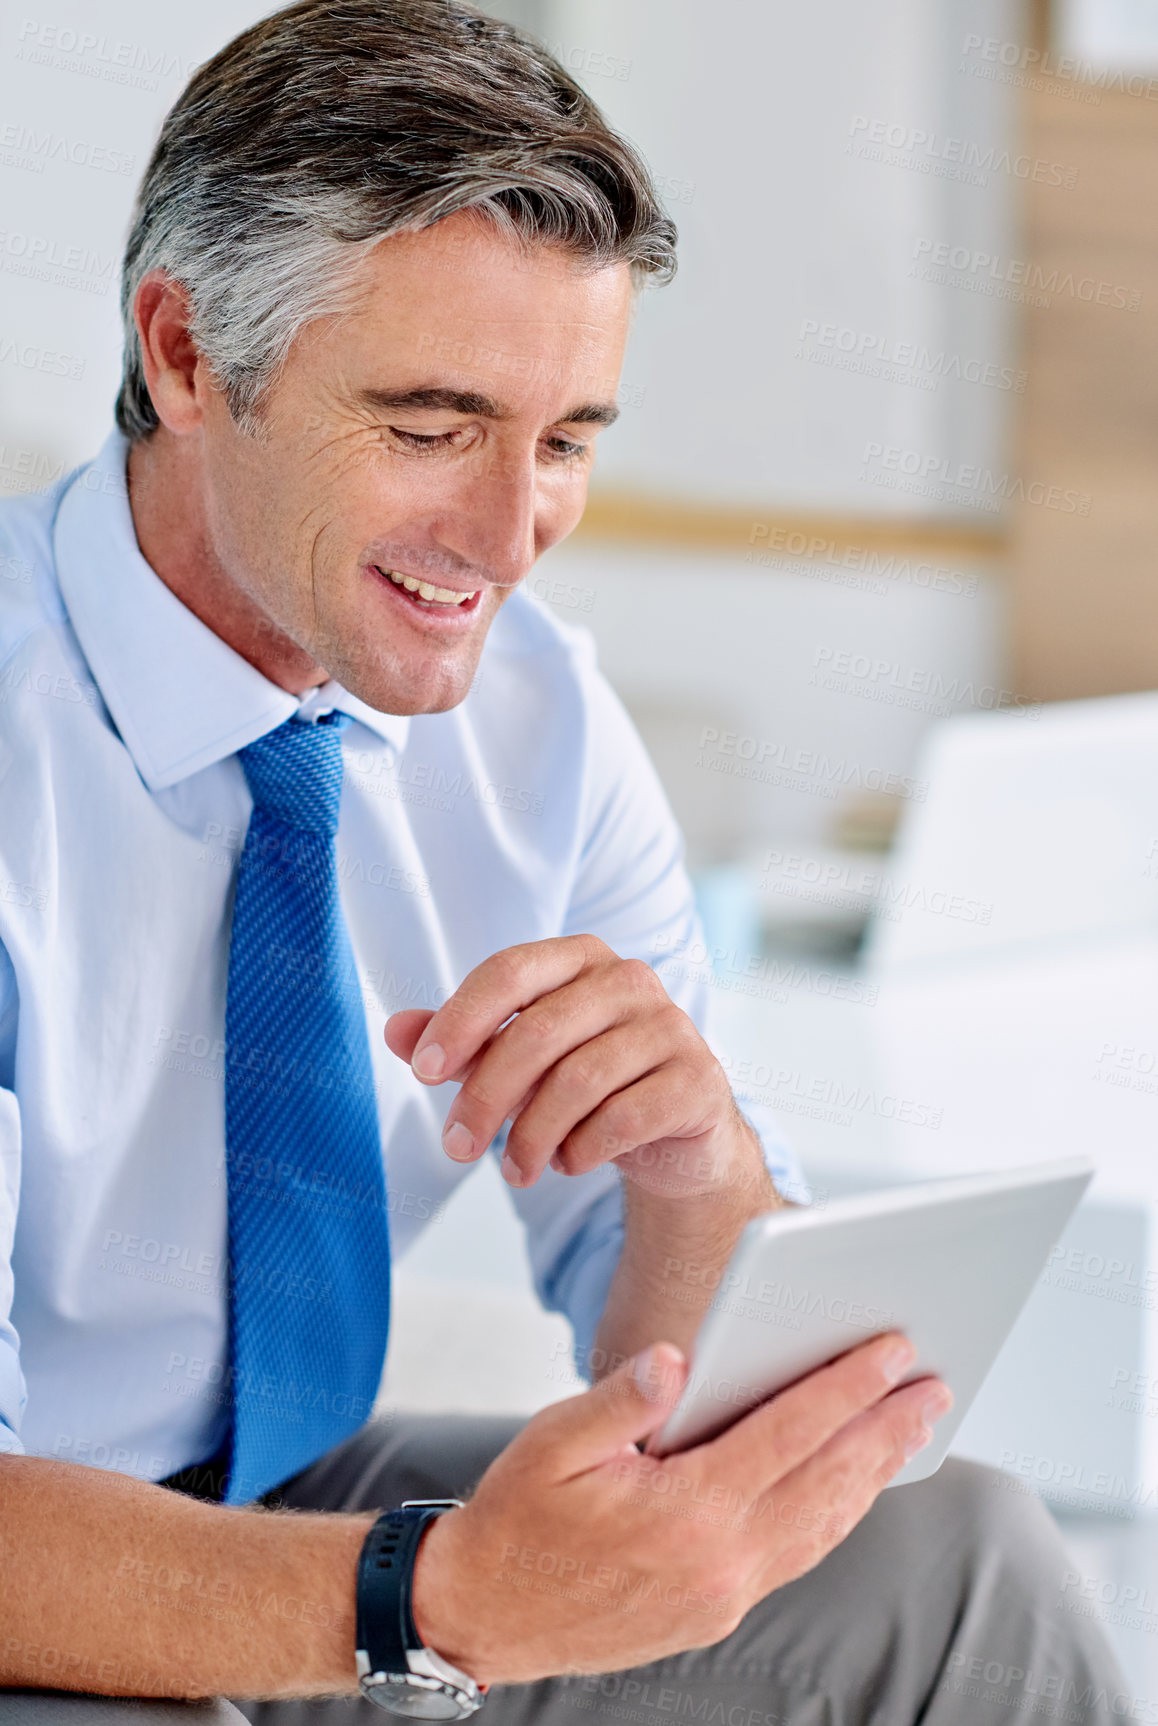 Buy stock photo Shot of a confident mature businessman sitting on a sofa indoors while working on a tablet